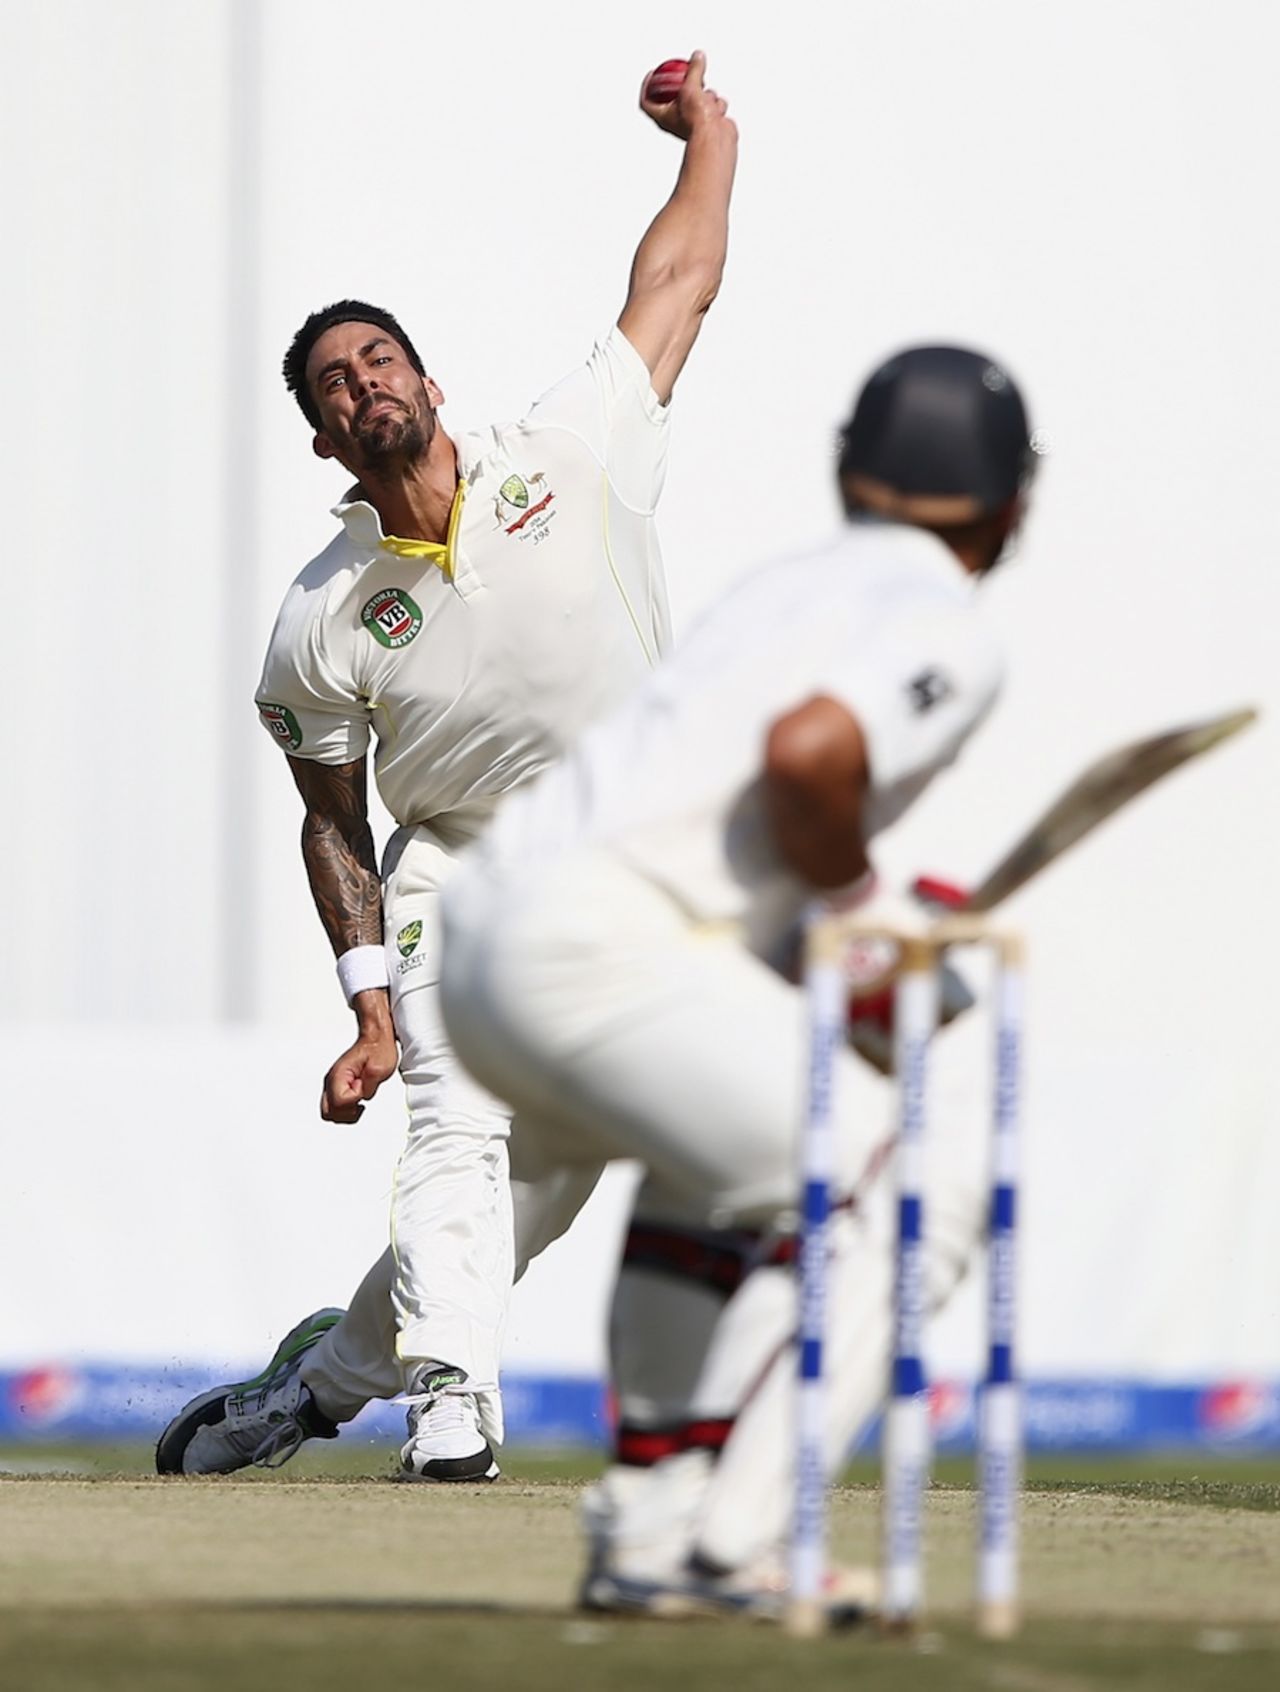 Mitchell Johnson about to release the ball, Pakistan v Australia, 2nd Test, Abu Dhabi, 1st day, October 30, 2014